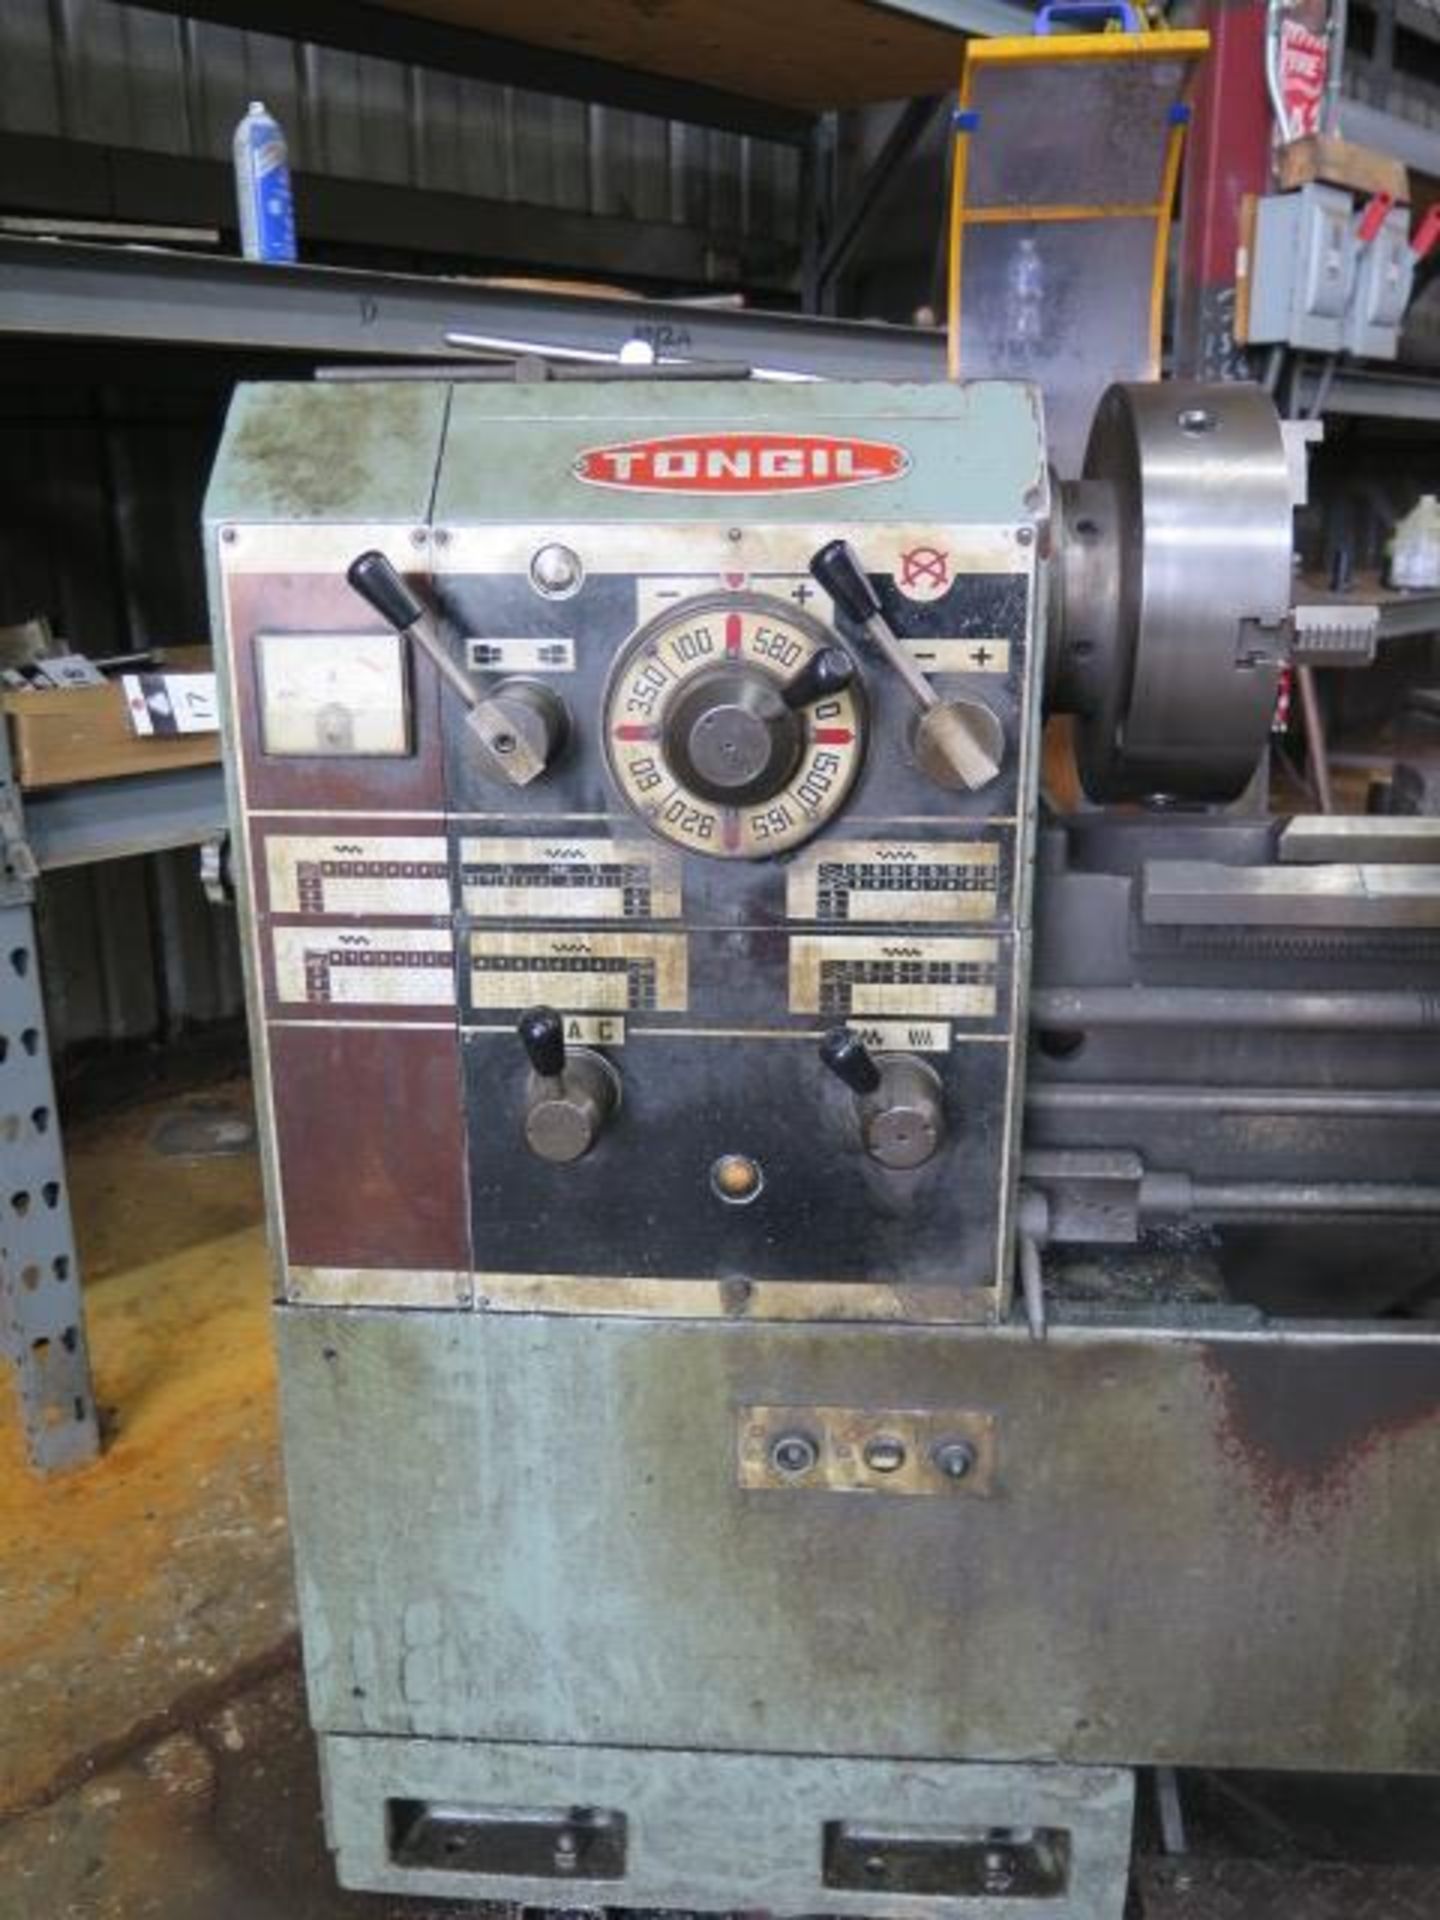 Tongil TIPL-4 15” x 42” Geared Head Gap Bed Lathe w/ 60-1500 RPM, Inch/mm Threading, SOLD AS IS - Image 4 of 12